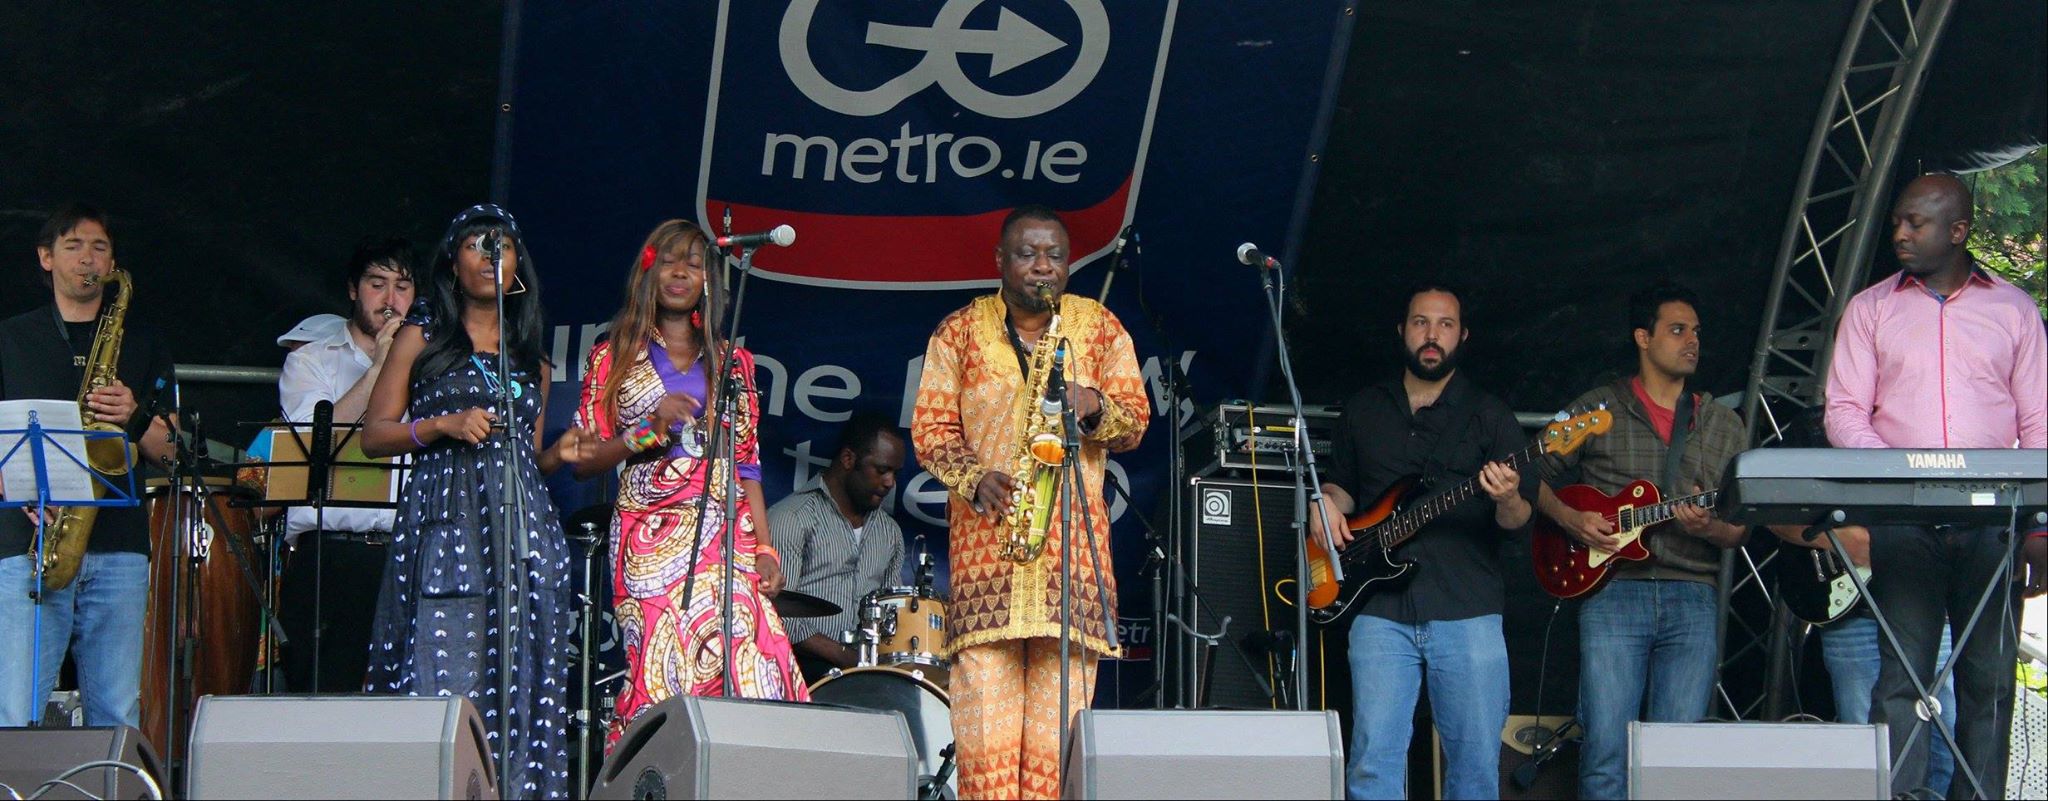 BOYE COLOURS AFROBEAT IN GO METRO LIVE IN DUBLIN 002 Migrant Artists & Cultural Diversity